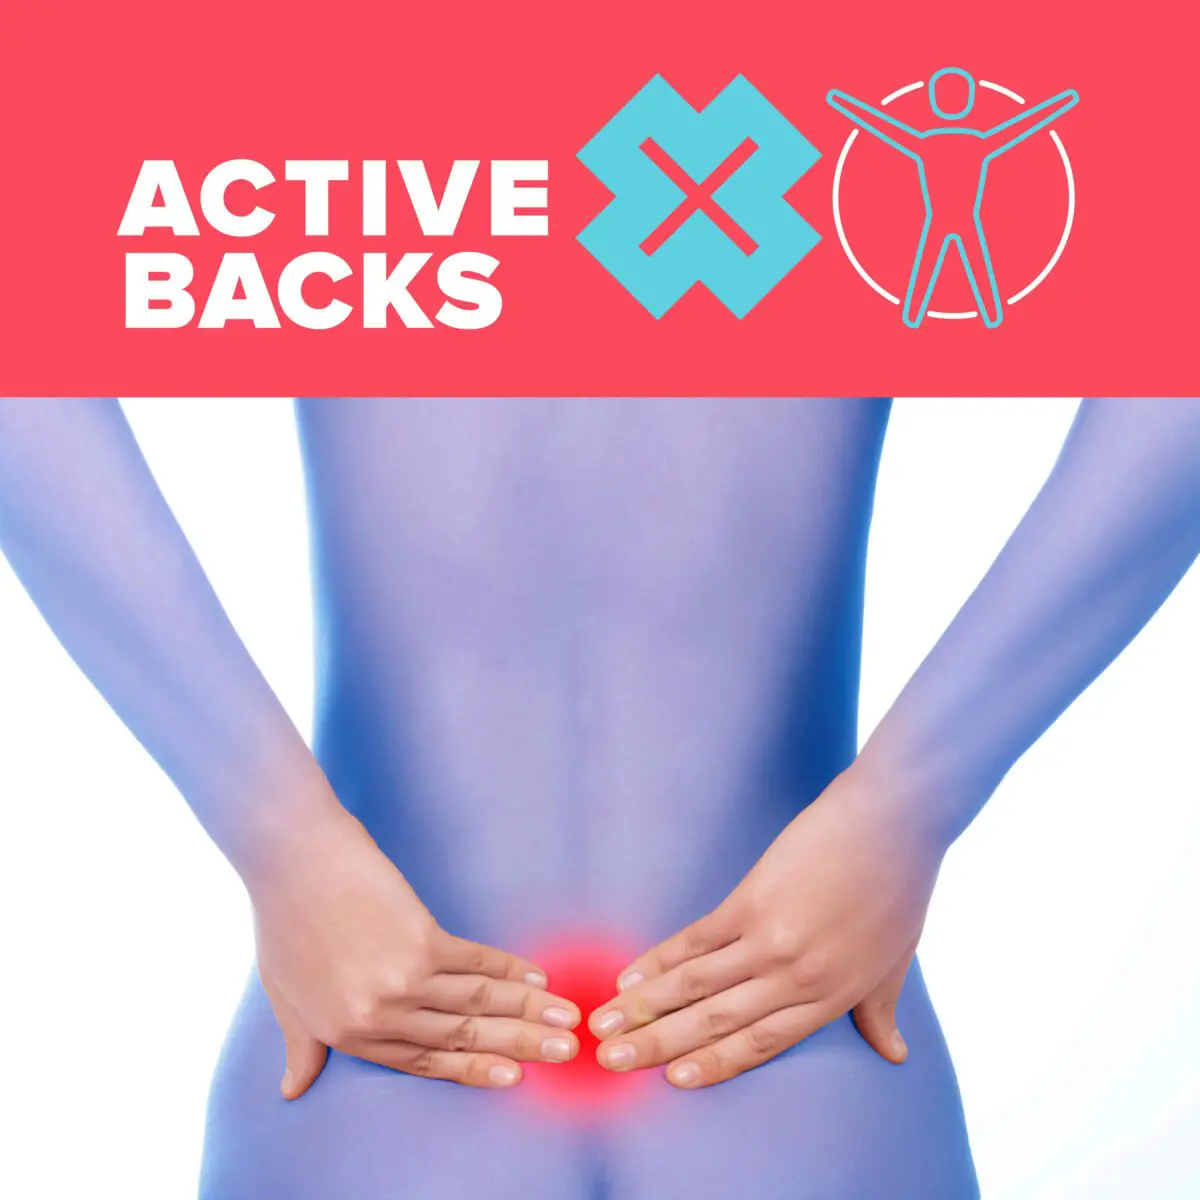 65: What should I do when my lower back spasms?